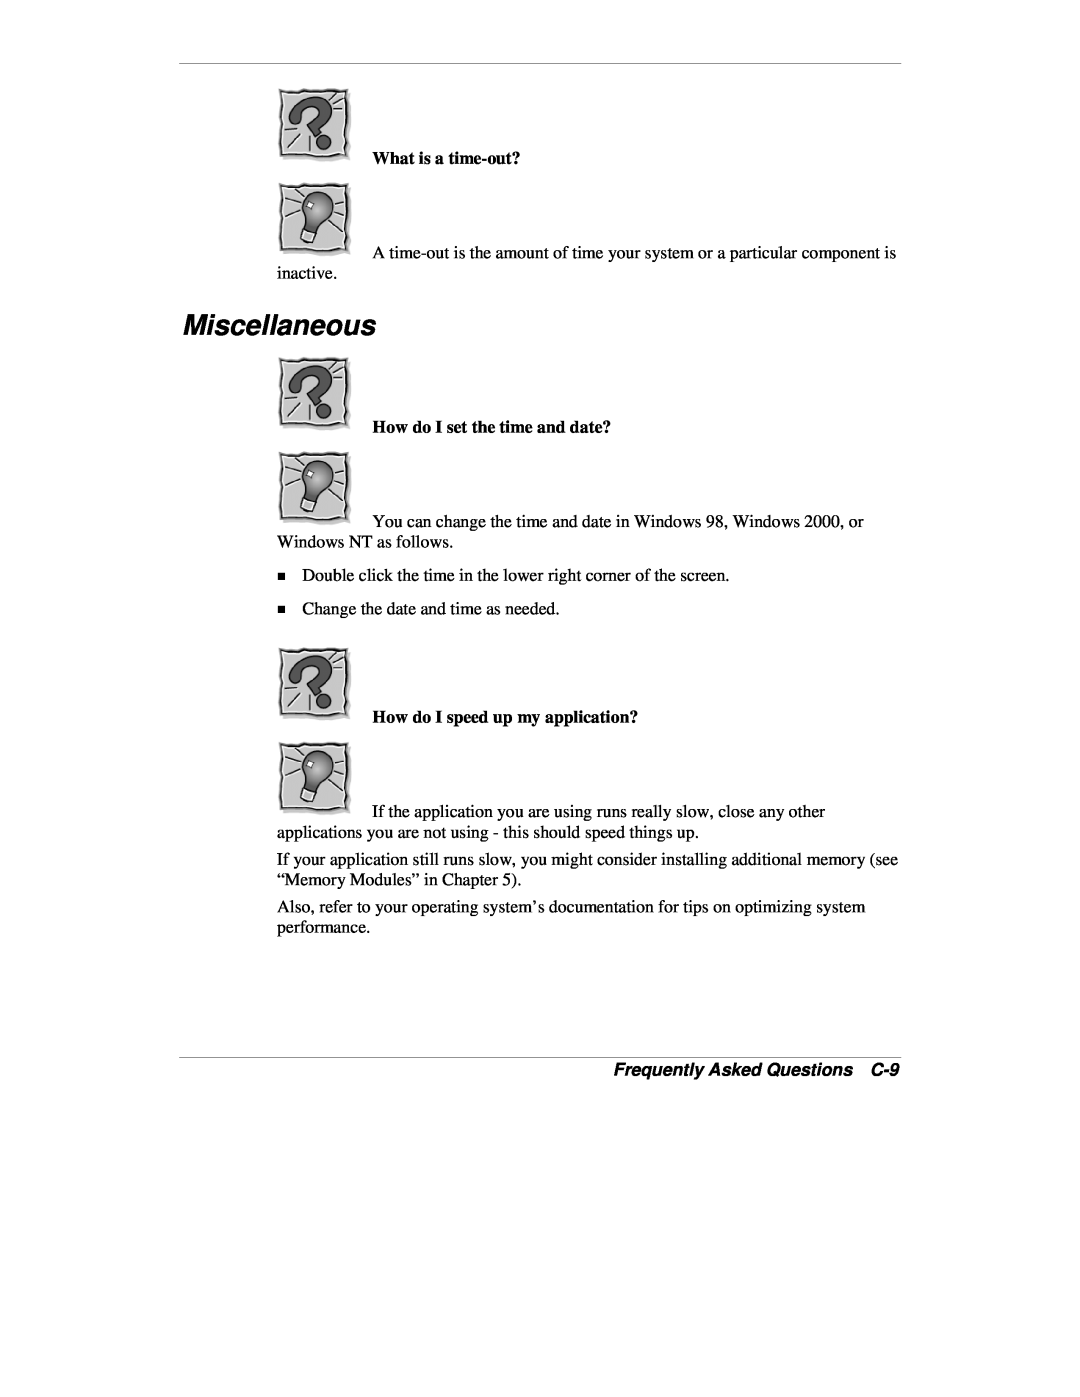 NEC VXi manual Miscellaneous, Frequently Asked Questions C-9 